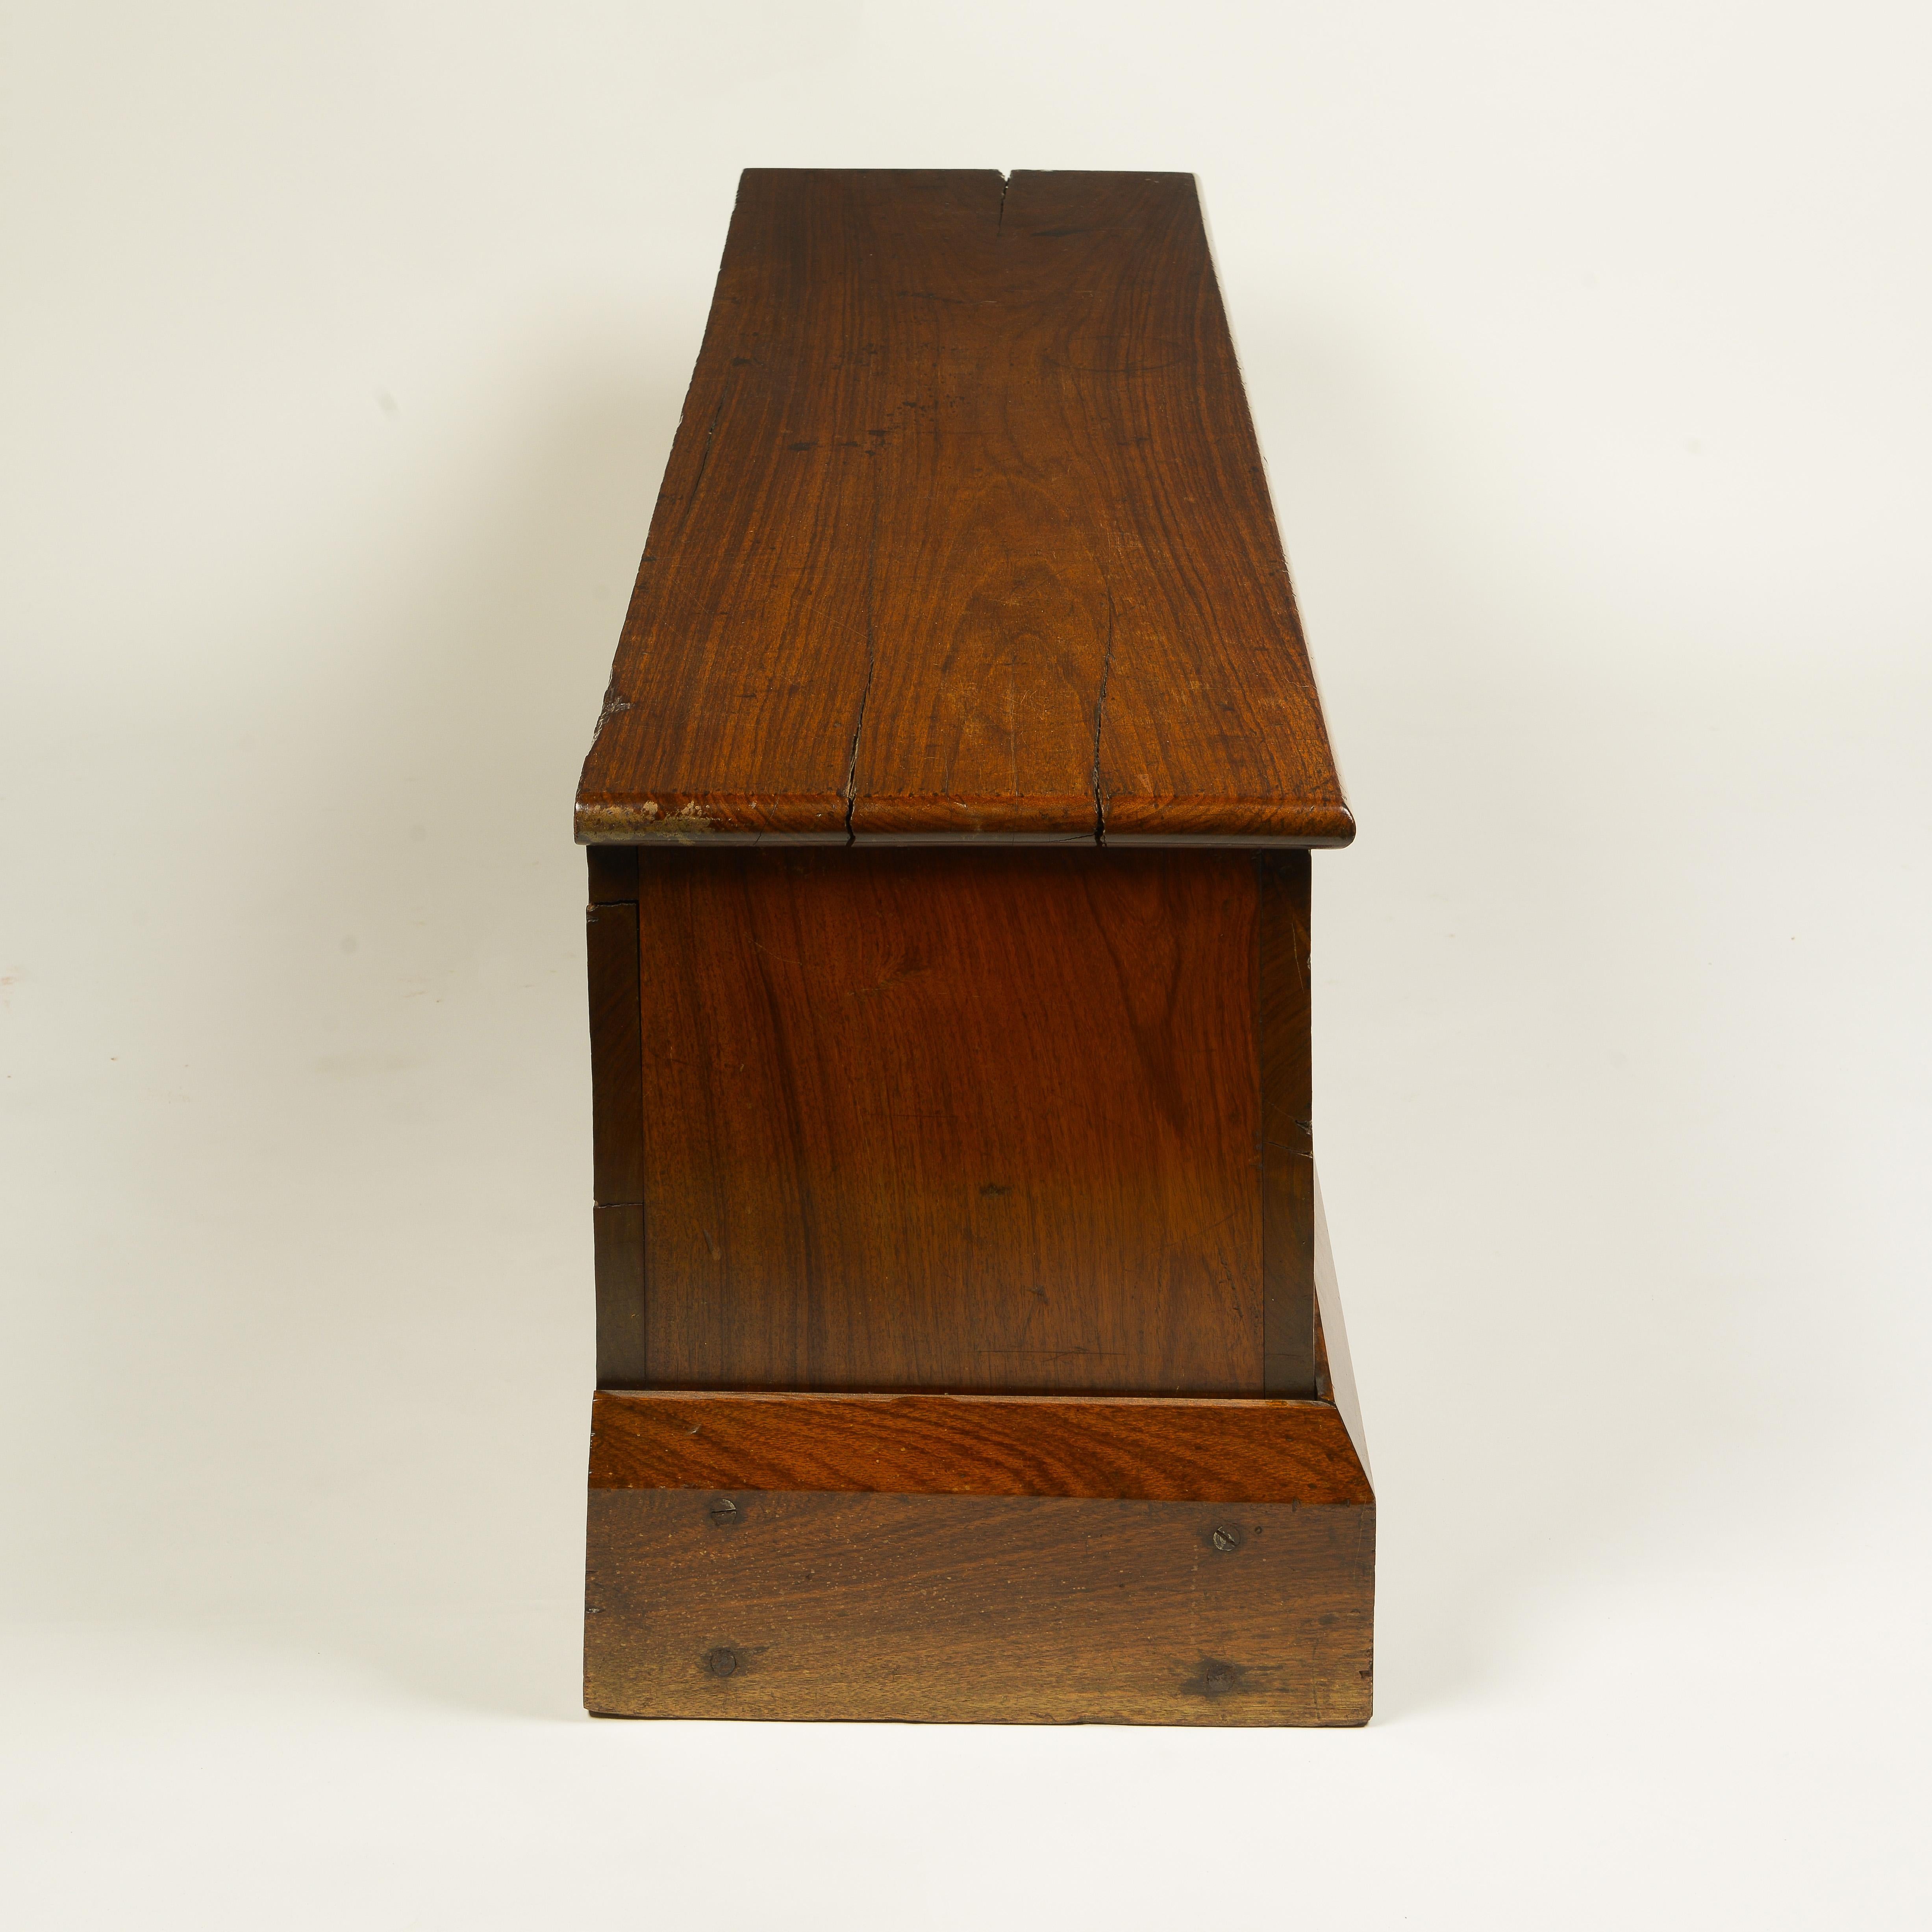 Of rectangular form with hinged lid; the reverse bearing inscription that chest was made for the East India Company, London, for the Paris Exhibition, most likely the World's Fair of 1867.